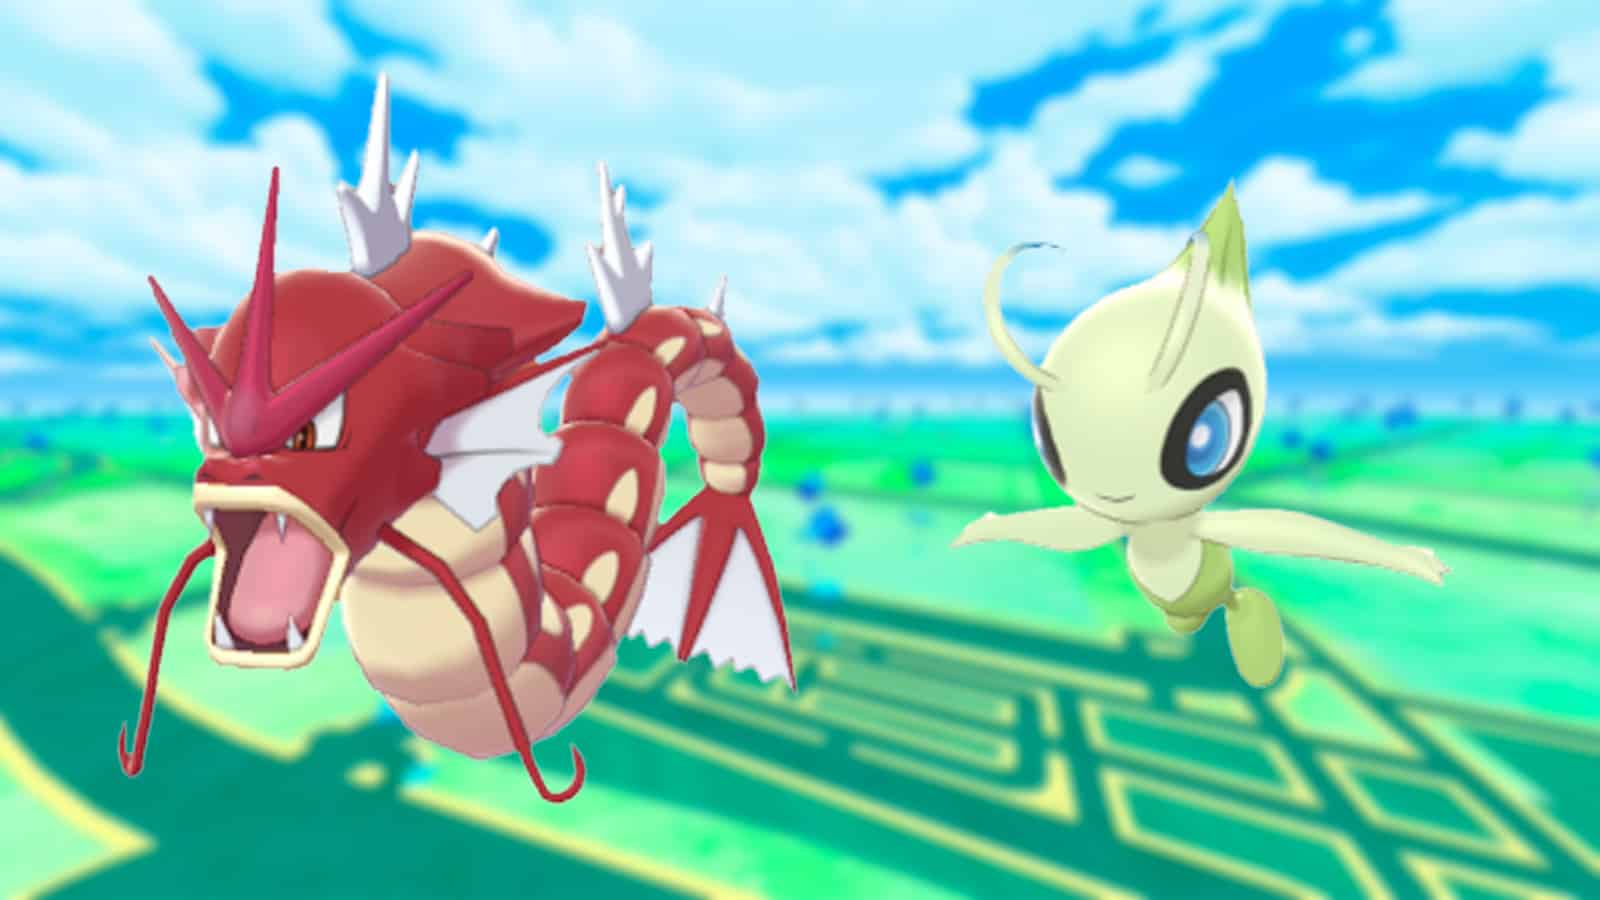 Pokemon Go players can catch Celebi through special research quests from  next week